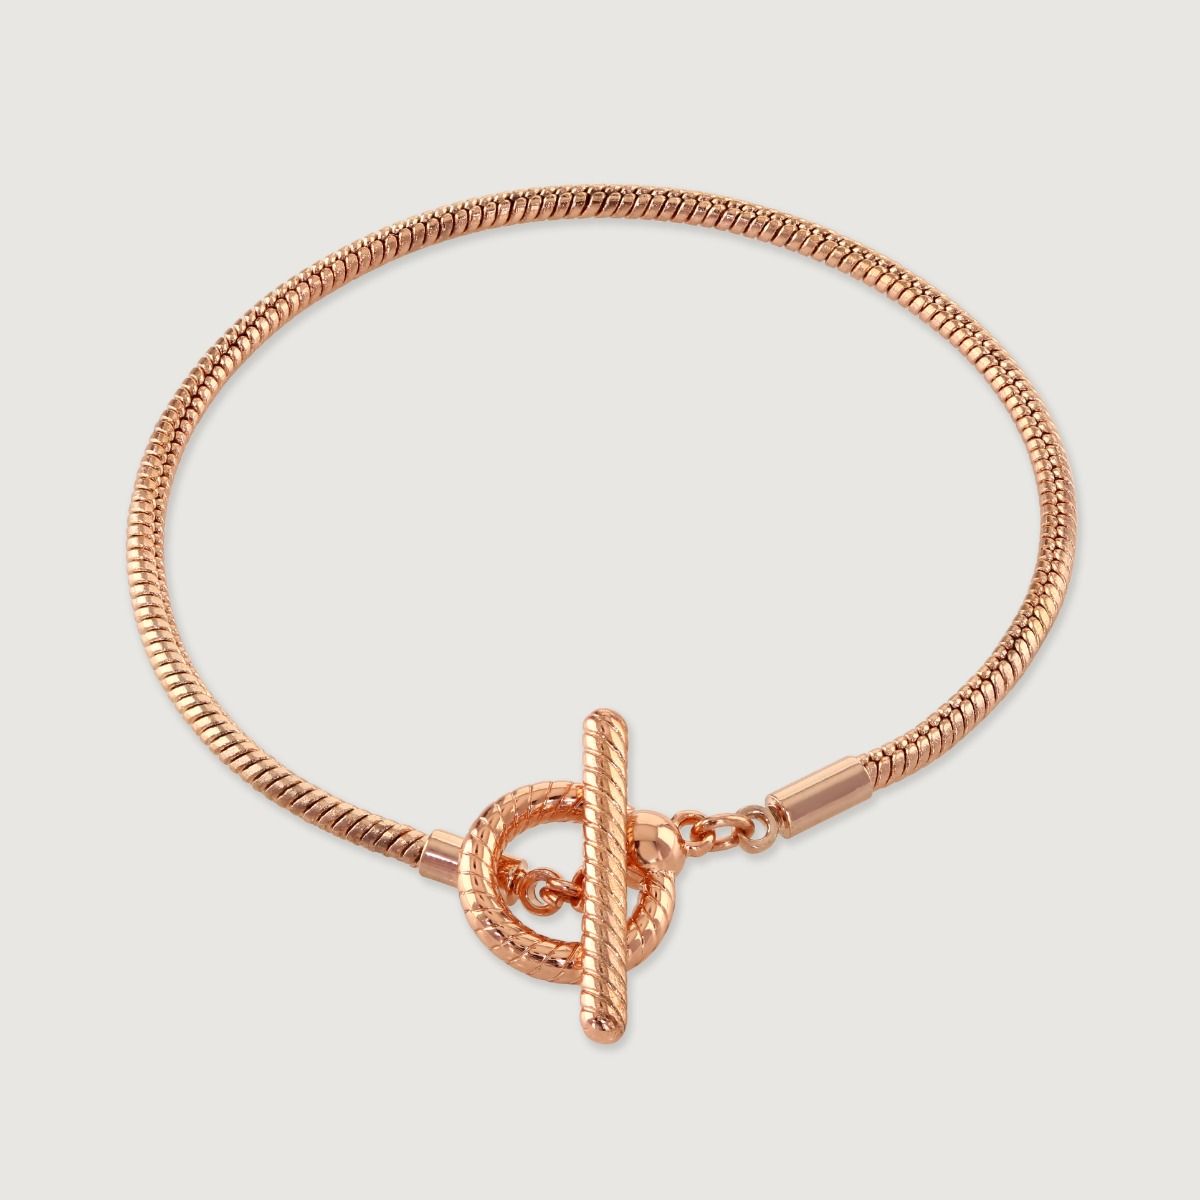 The Rose Gold Rope Style T-Bar Bracelet is a stunning and sophisticated accessory. With its intricate rope-style design in radiant rose gold, this bracelet exudes timeless elegance. The T-Bar centrepiece adds a touch of charm and style, making it a versat